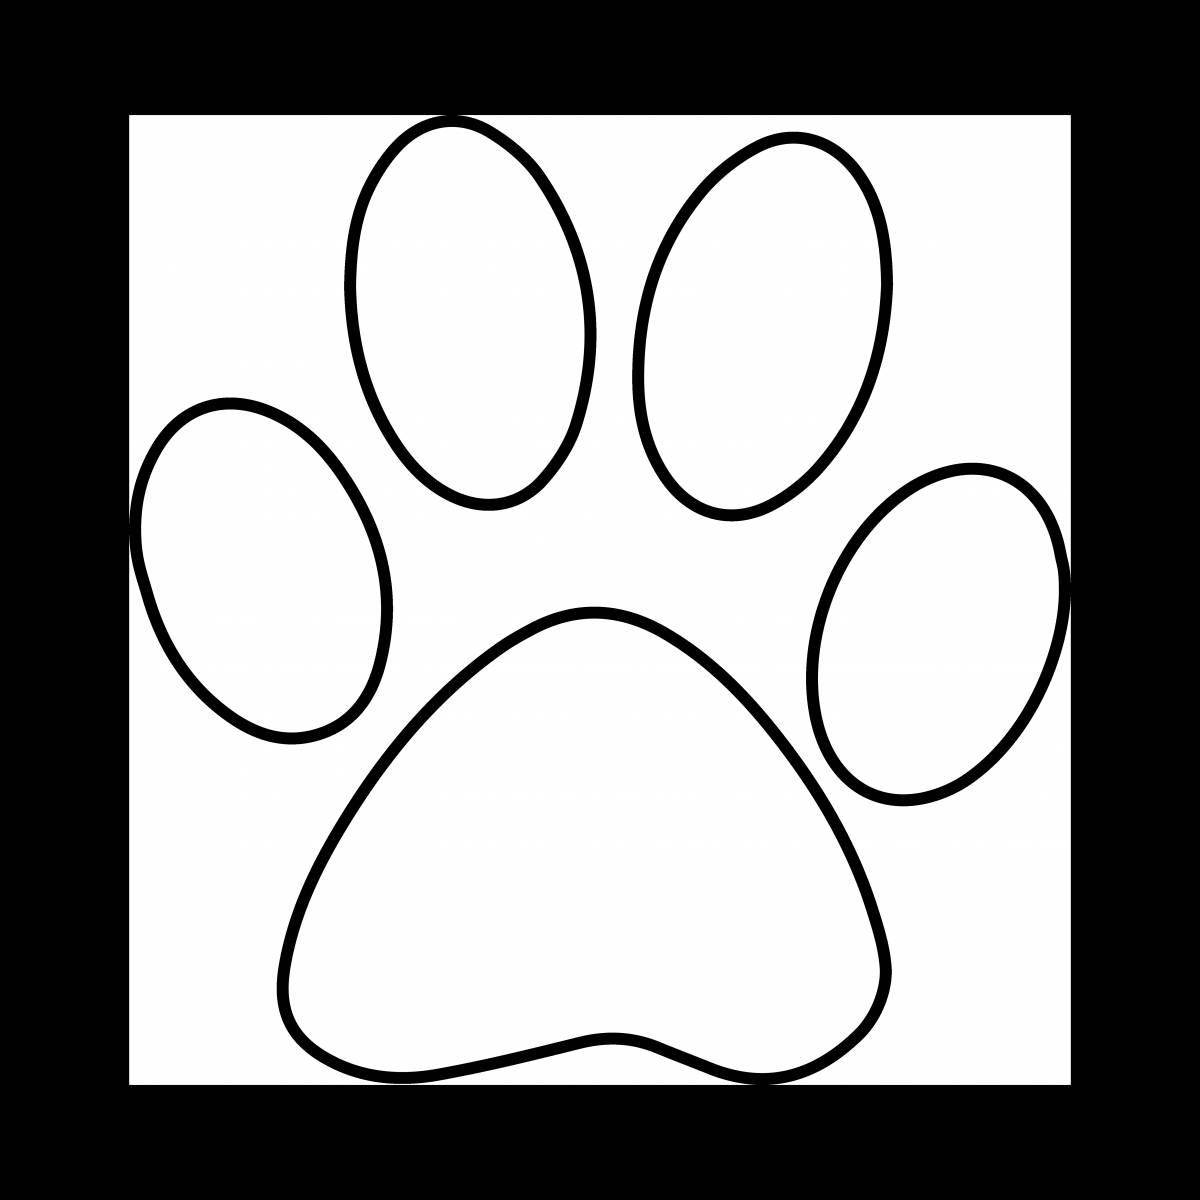 Coloring cute cat's paw